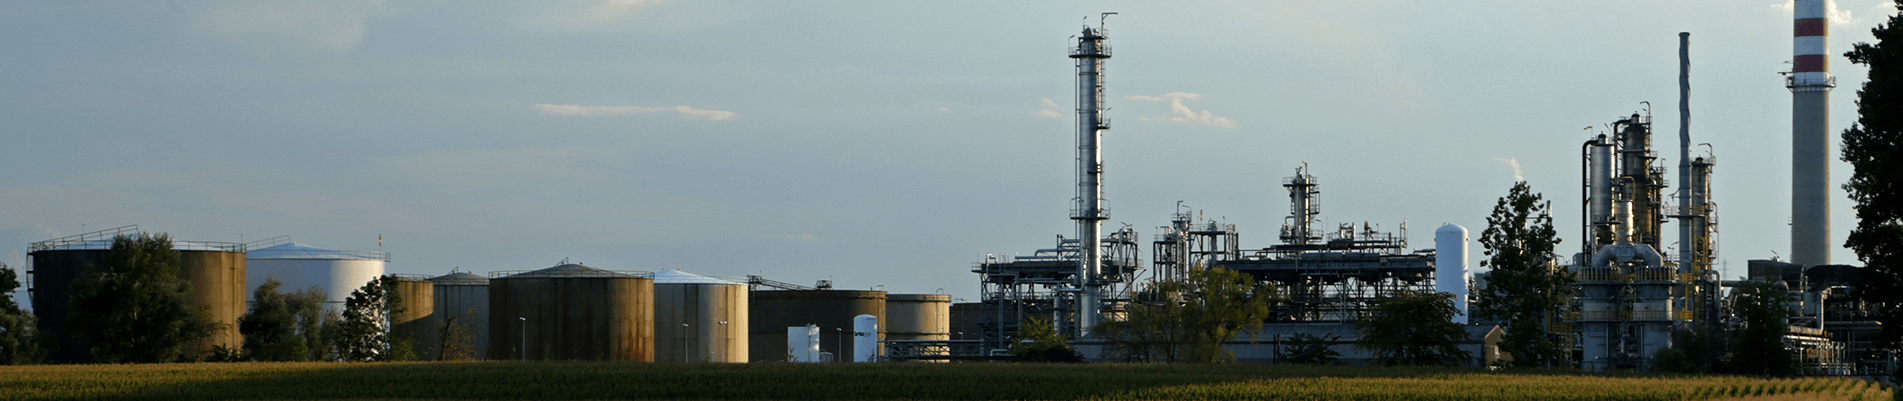 View of a refinery showing storage tanks and facility infrastructure